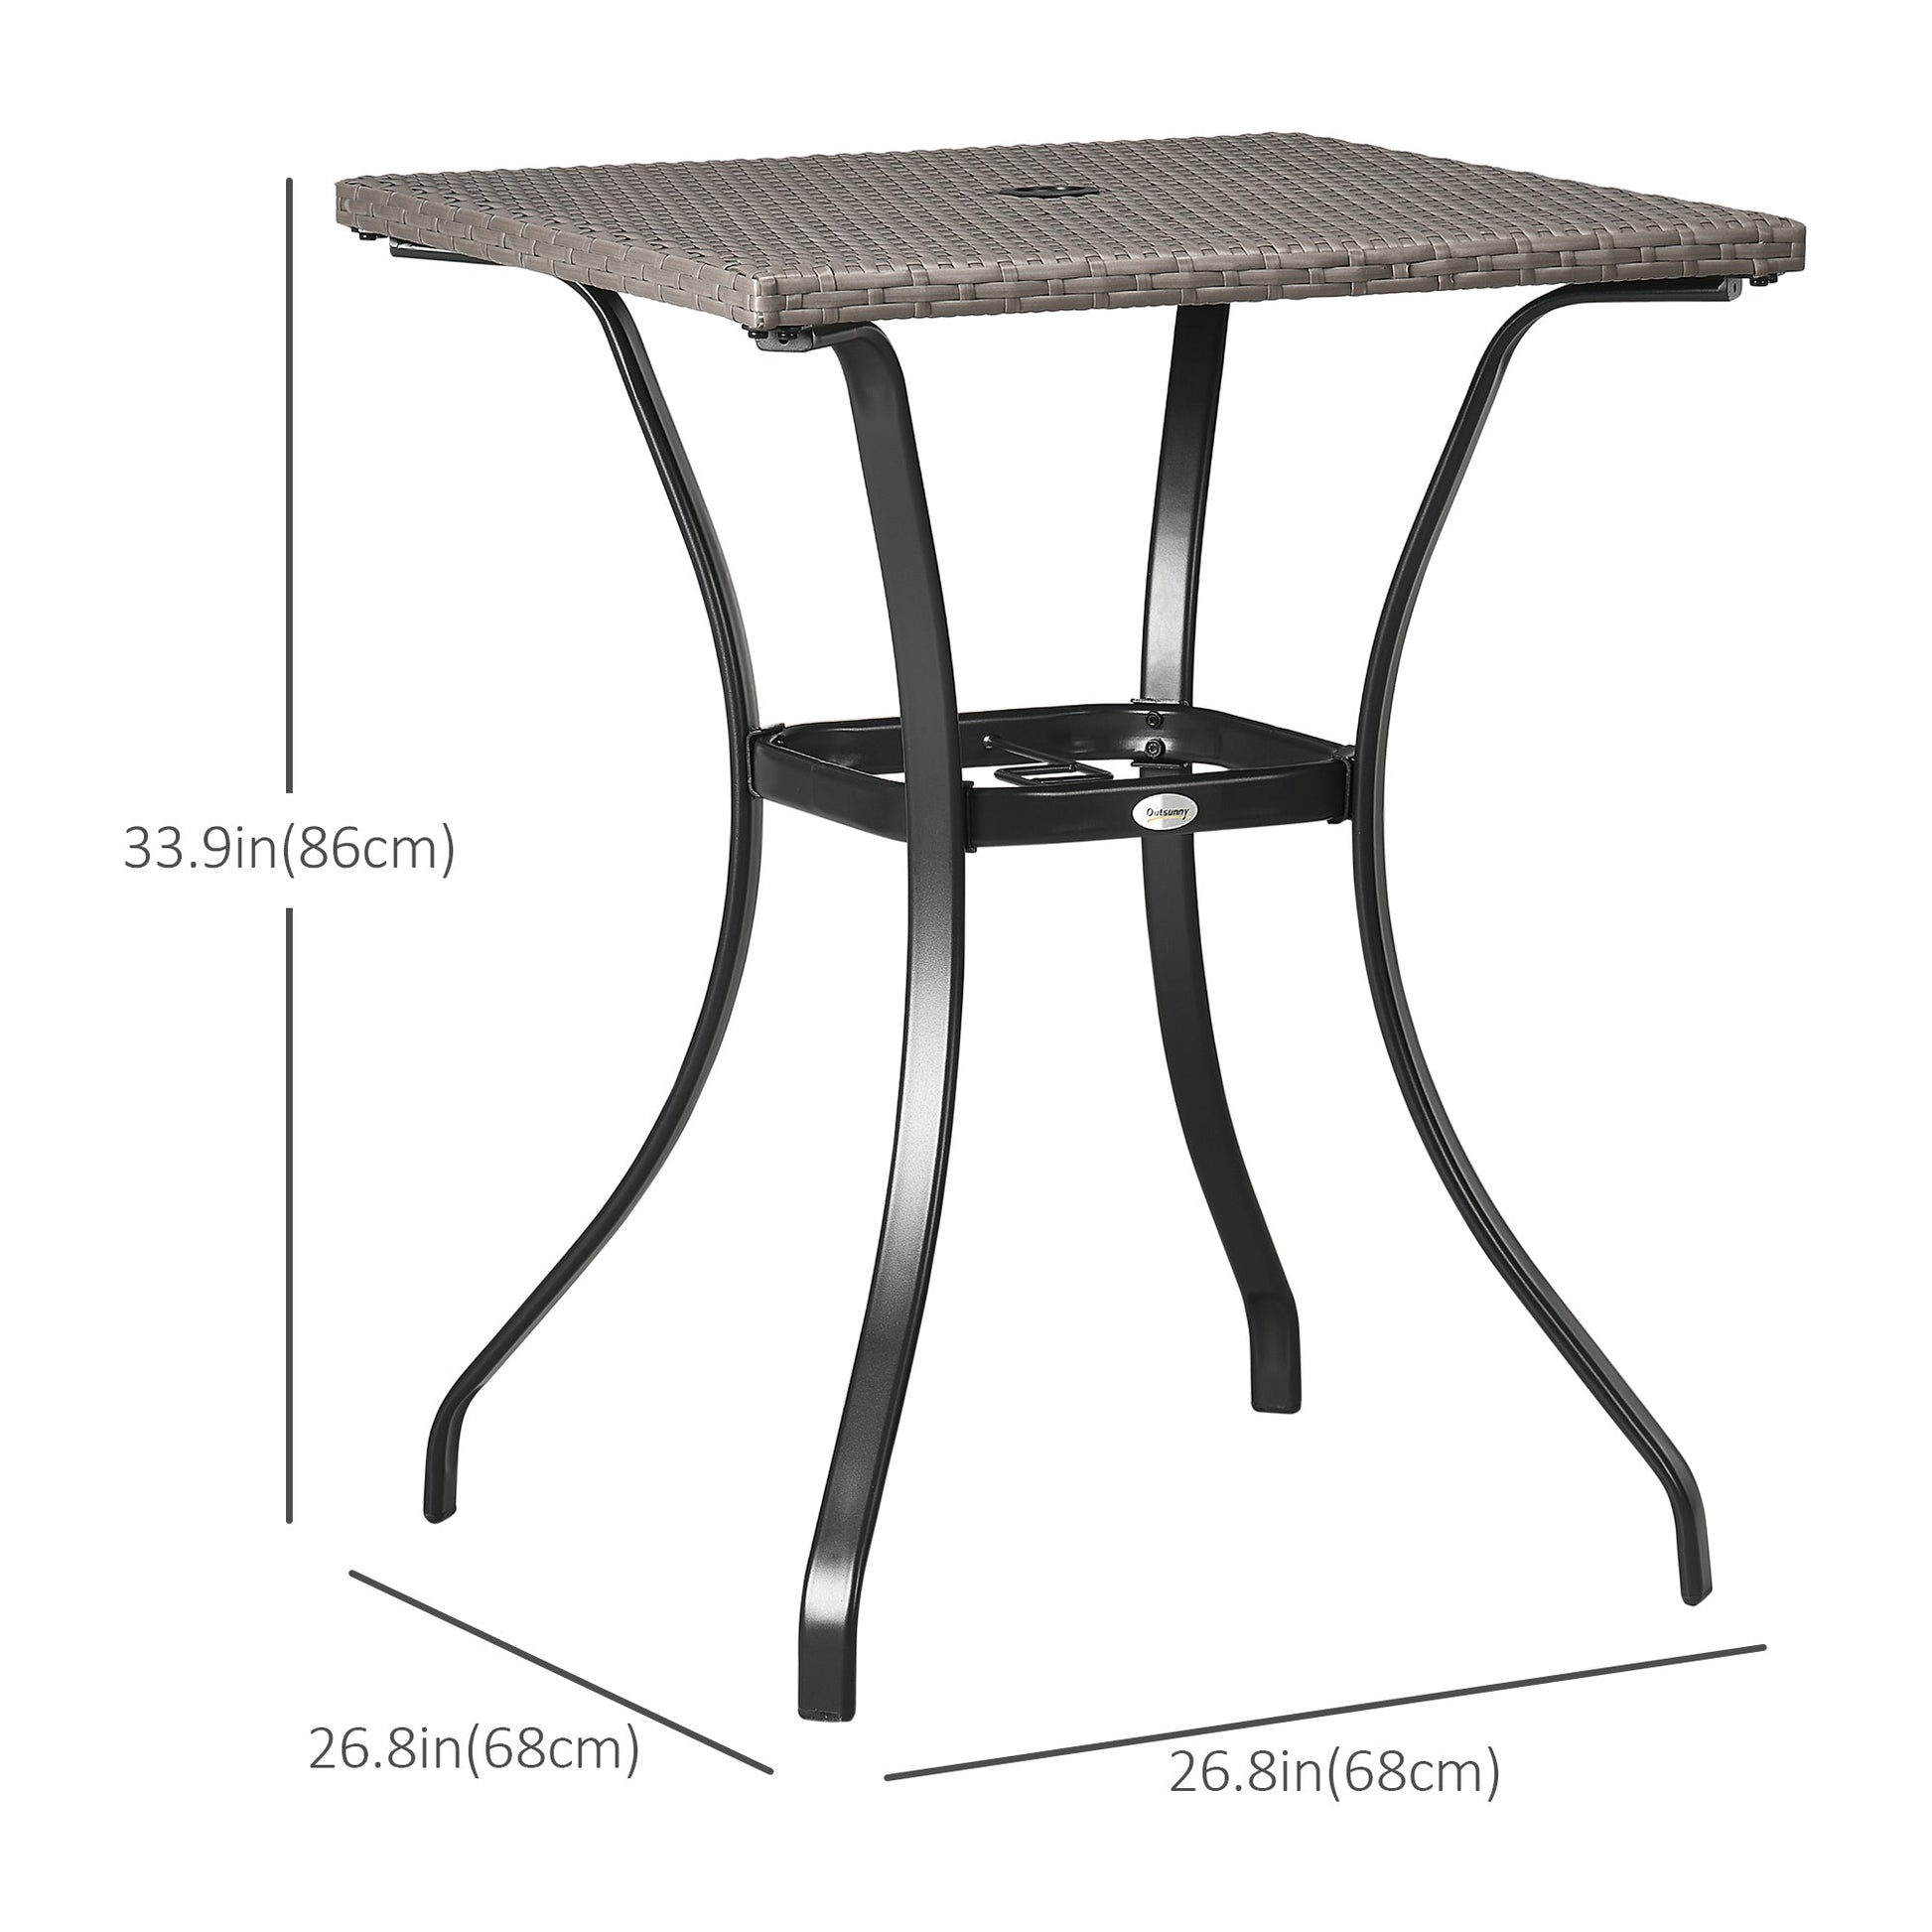 Patio Wicker Dining Table with Umbrella Hole, Outdoor PE Rattan Coffee Table with Plastic Board Under the Full Woven Table Top for Patio, Garden, Balcony, Light Grey at Gallery Canada